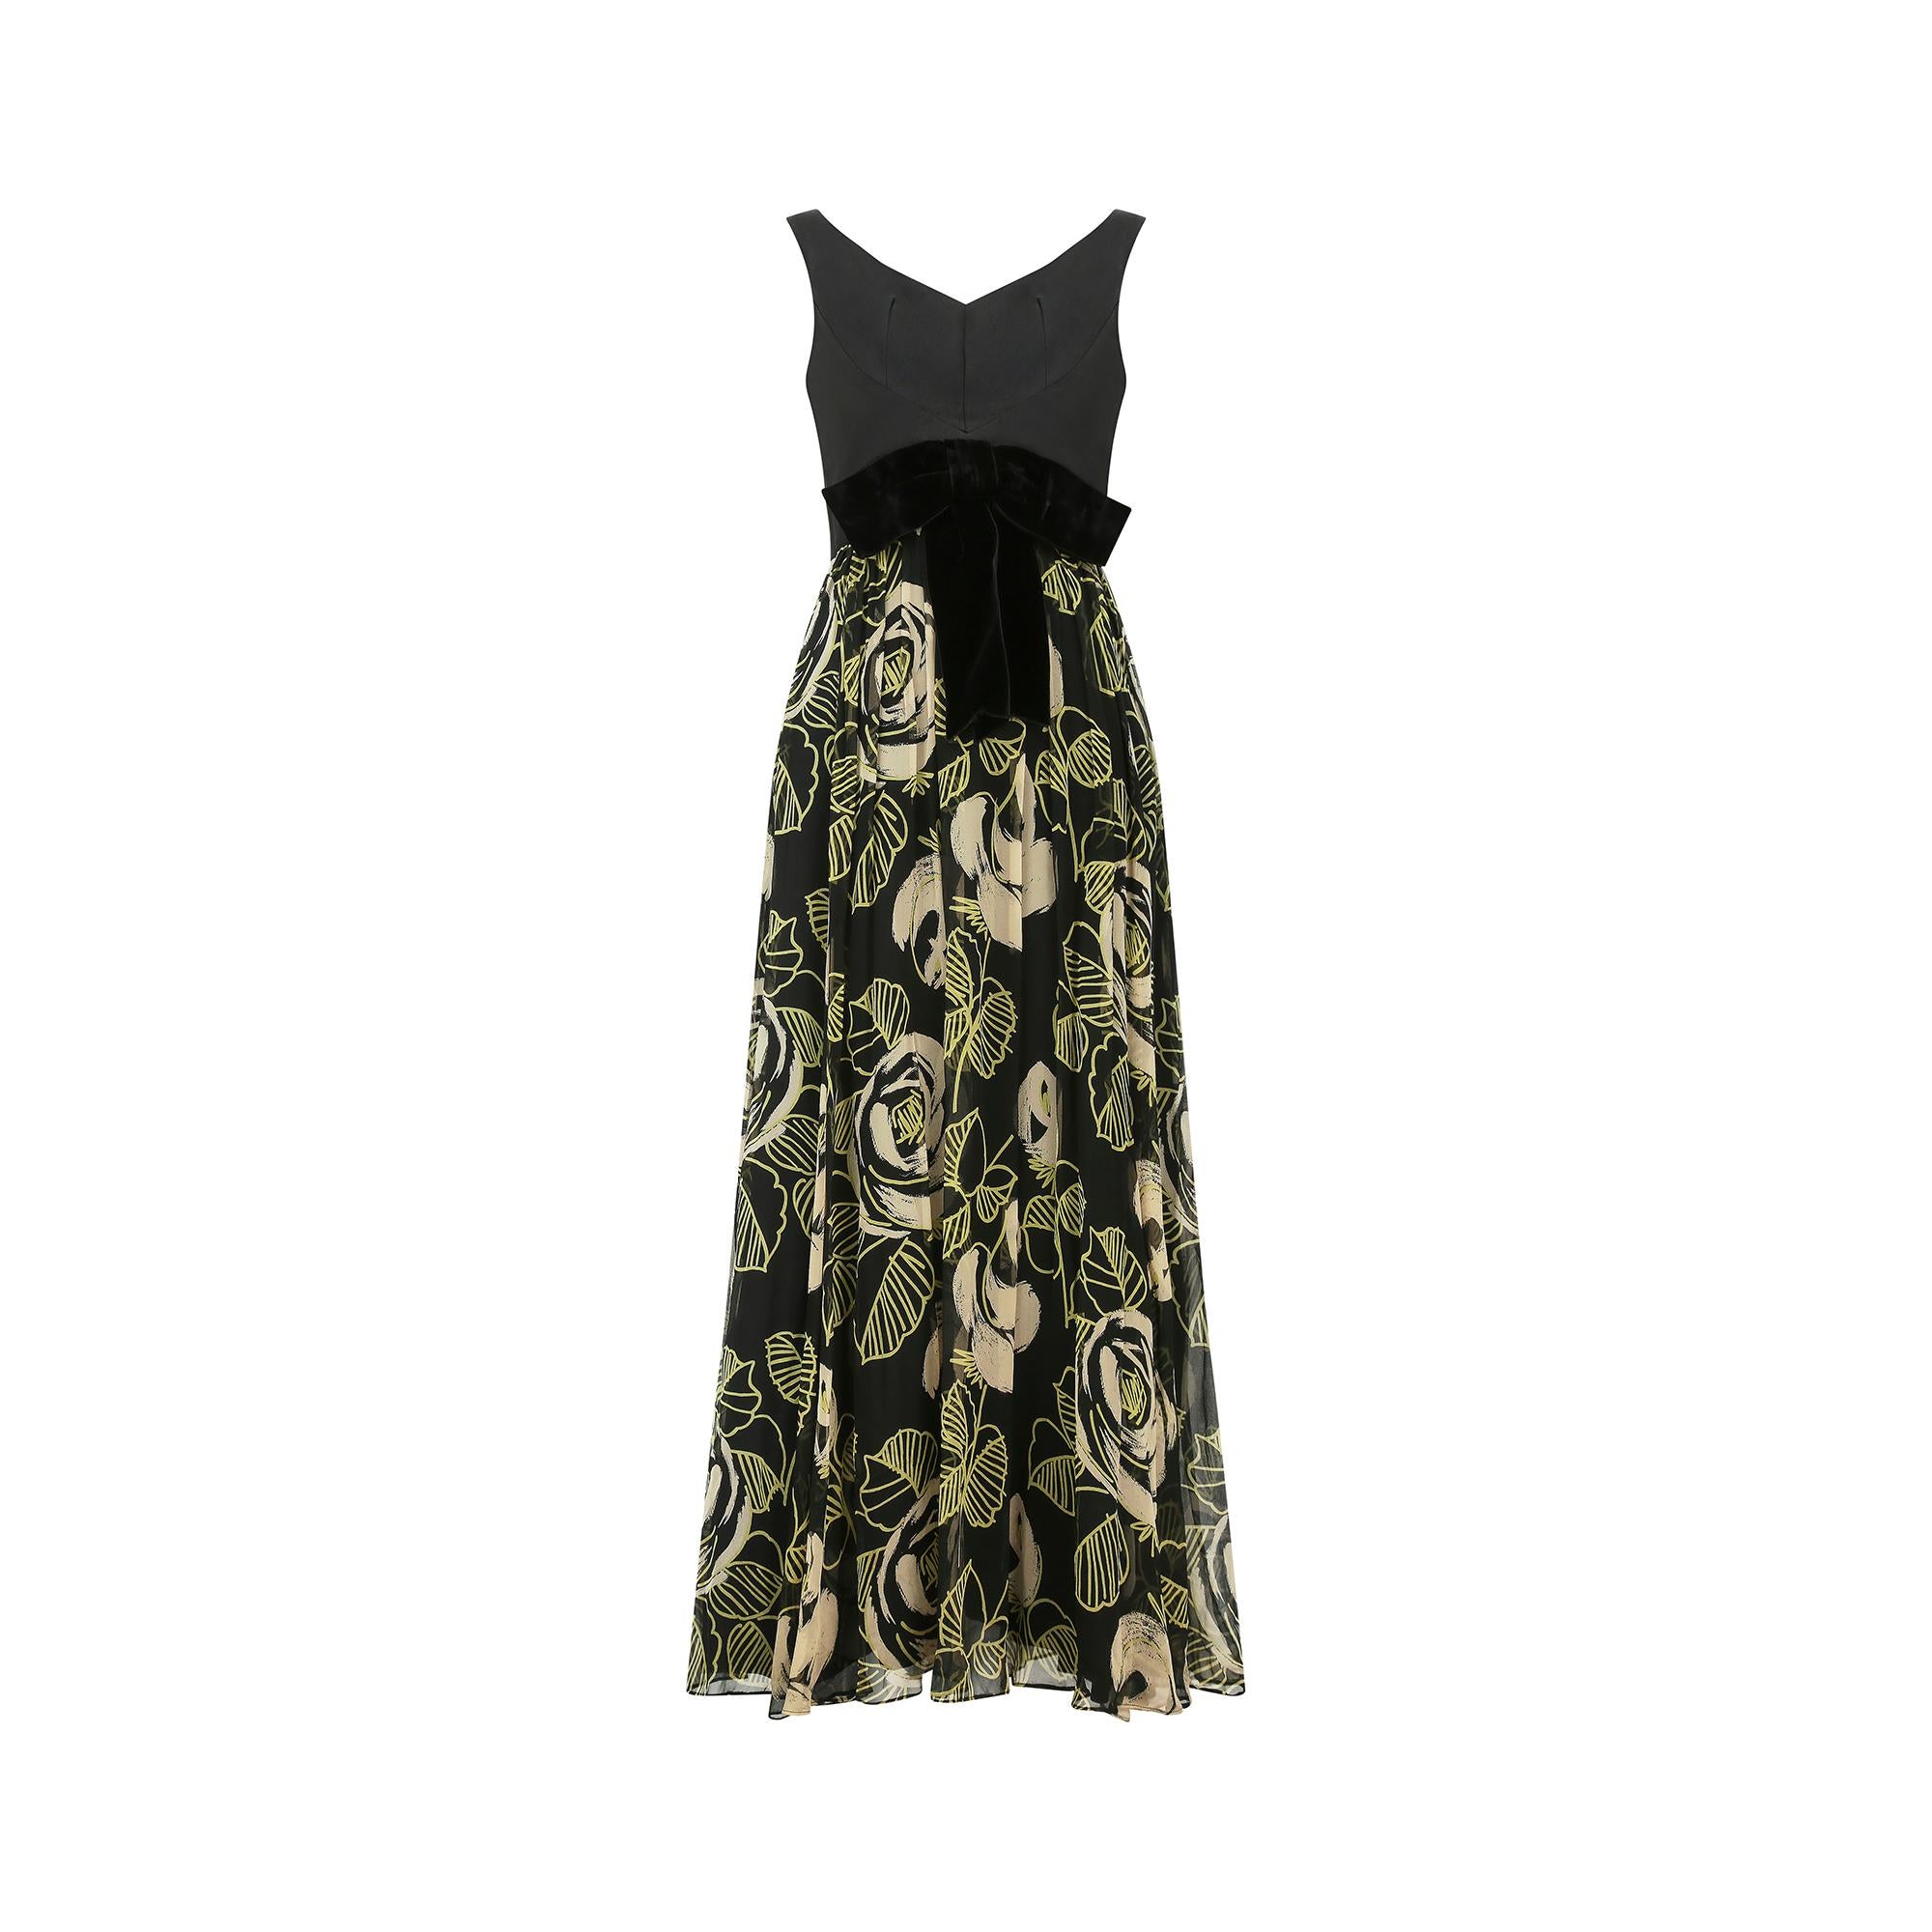 Superb mid 1960s Saks Fifth Avenue floral maxi evening dress with a soft silk bodice, with beautiful darts under the bust which create a lovely feminine silhouette. It has a gentle V shaped sweetheart neckline to both the front and back, with slim